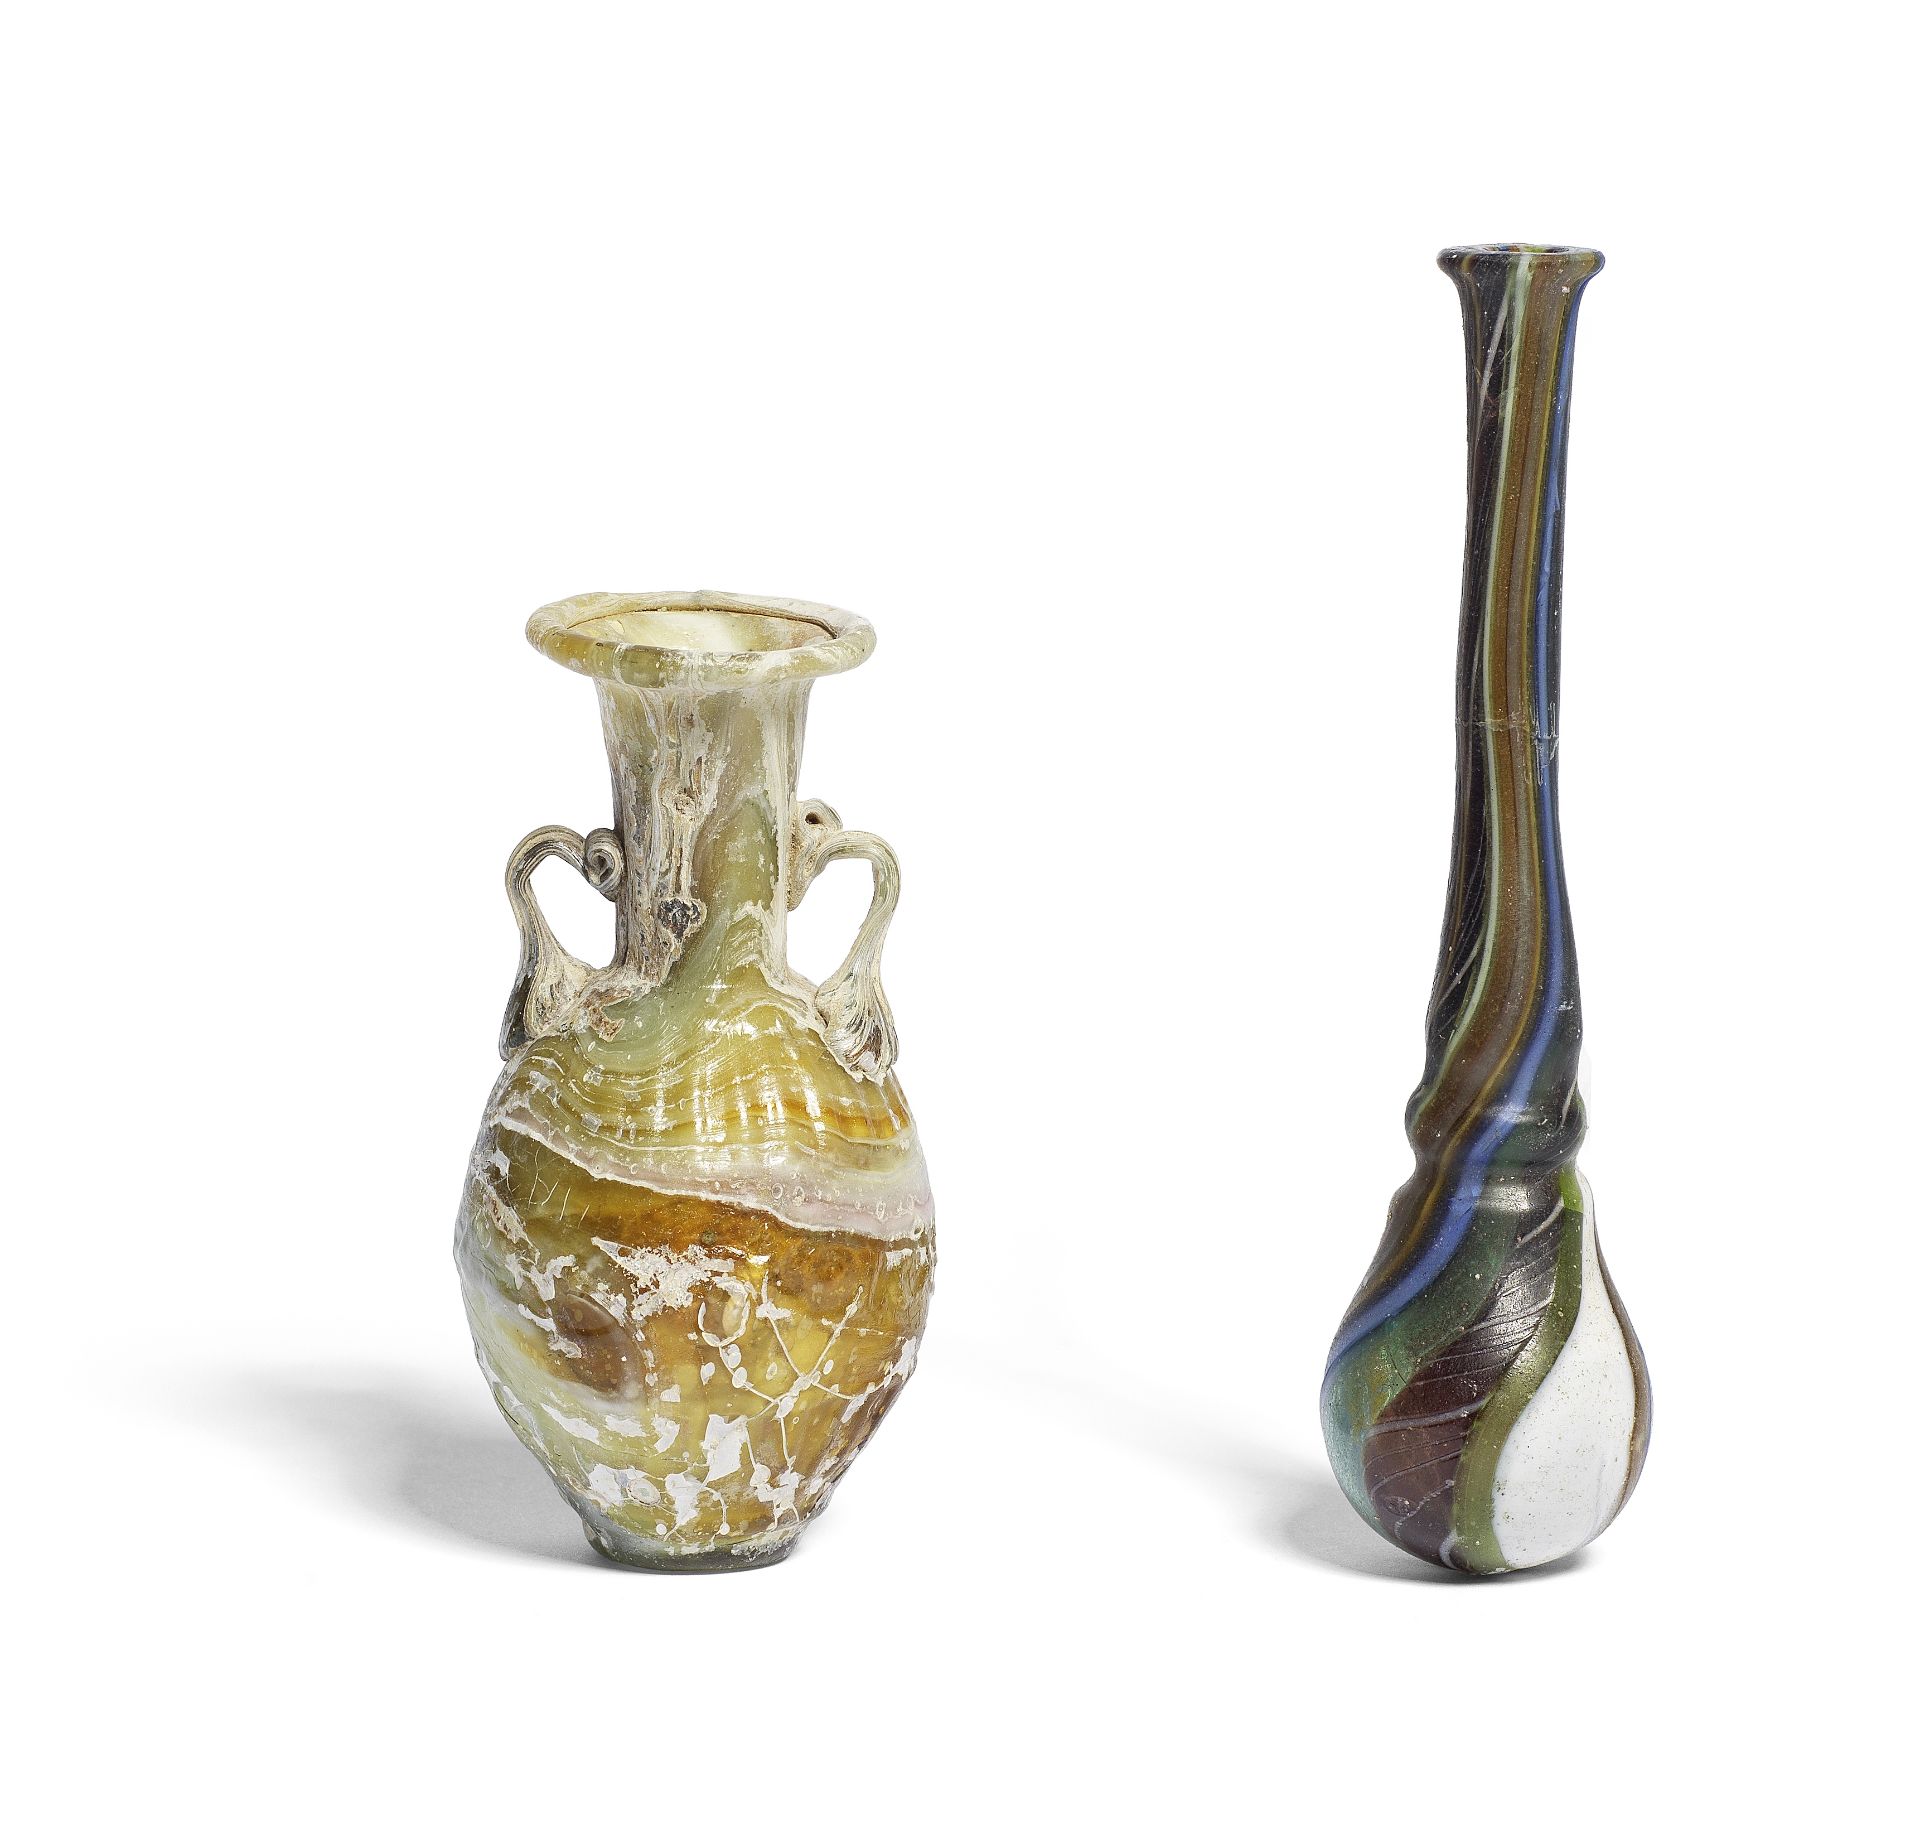 A Sidonian marbled glass amphoriskos and an After the Antique colour-band glass flask, 2